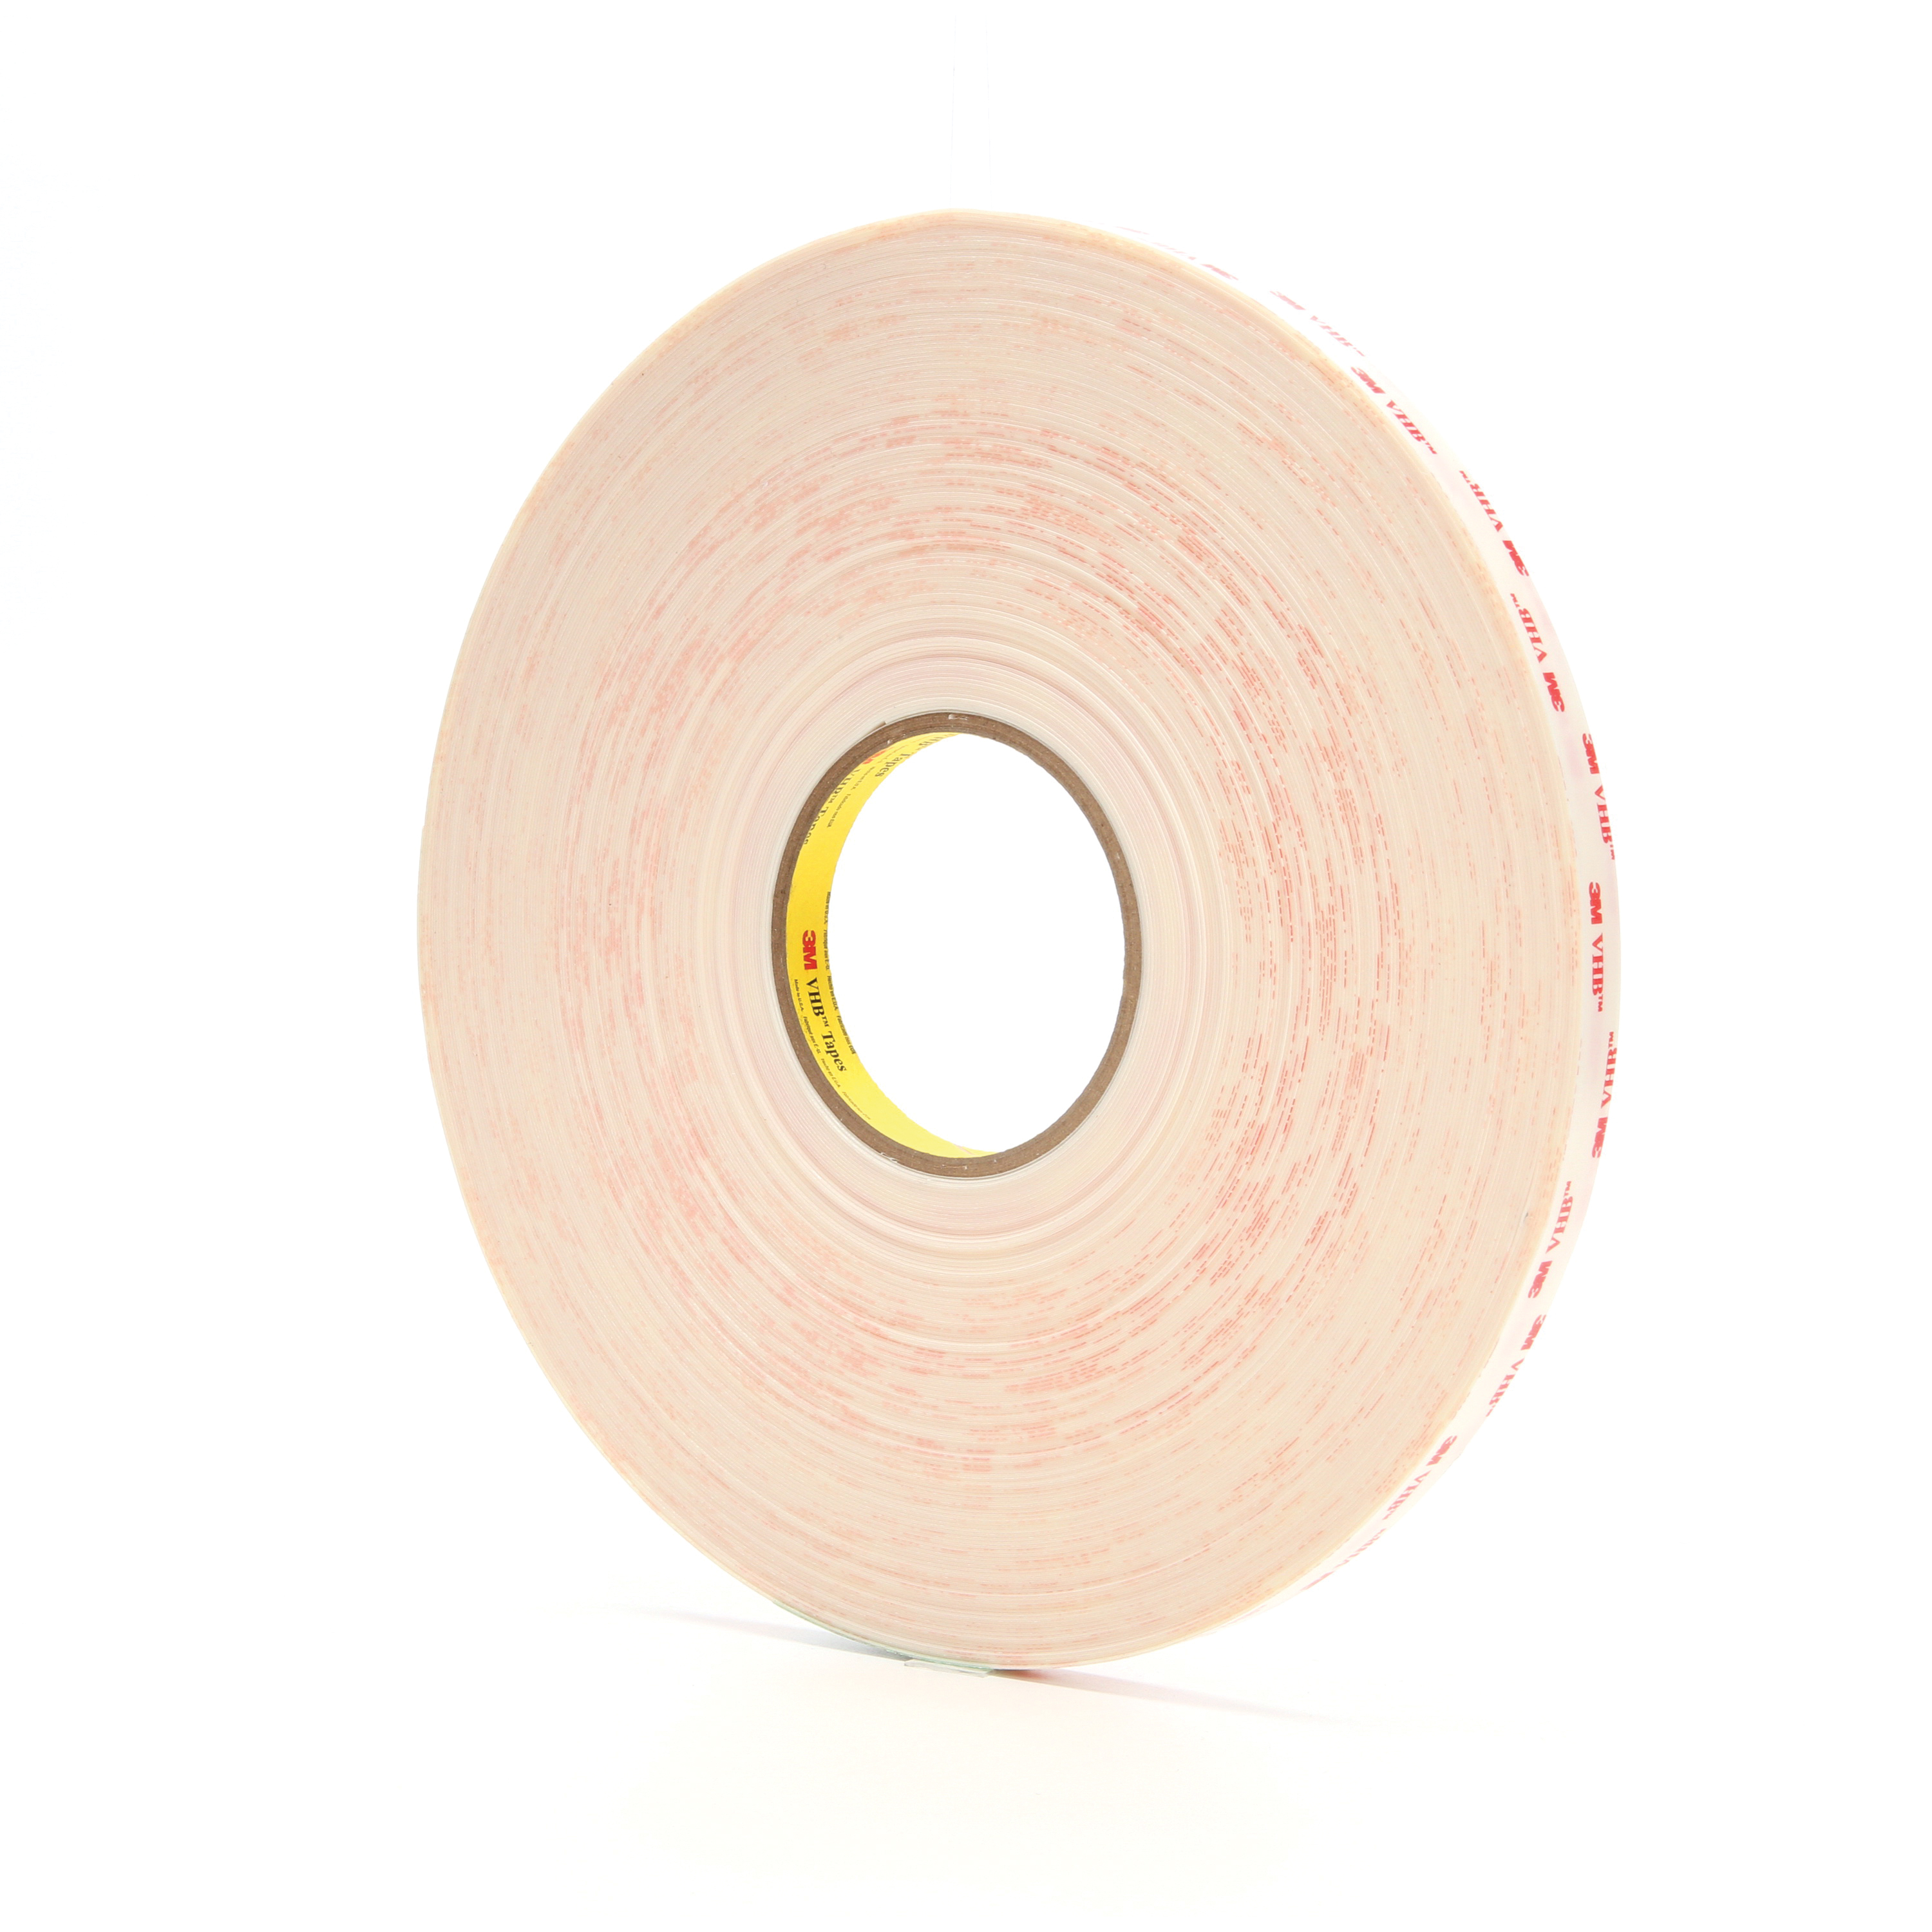 3M™ VHB™ 021200-67788 Pressure Sensitive Double Sided Bonding Tape, 72 yd L x 1/2 in W, 0.025 in THK, Low Surface Energy Acrylic Adhesive, Acrylic Foam Backing, White